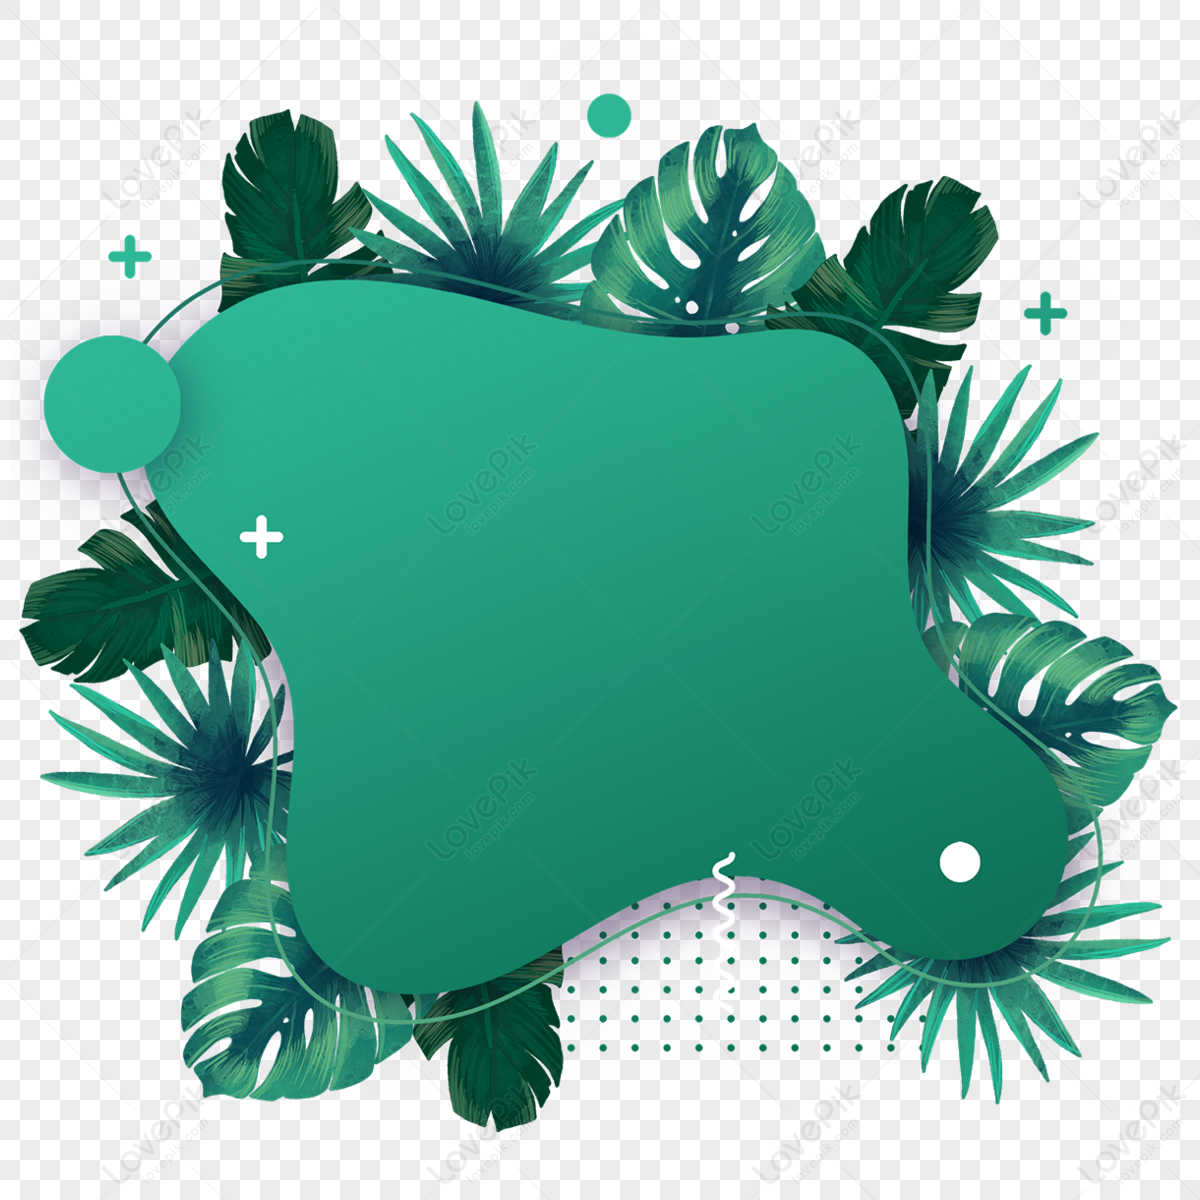 Summer tropical leaves green abstract fluid border,hawaii,holiday png hd transparent image